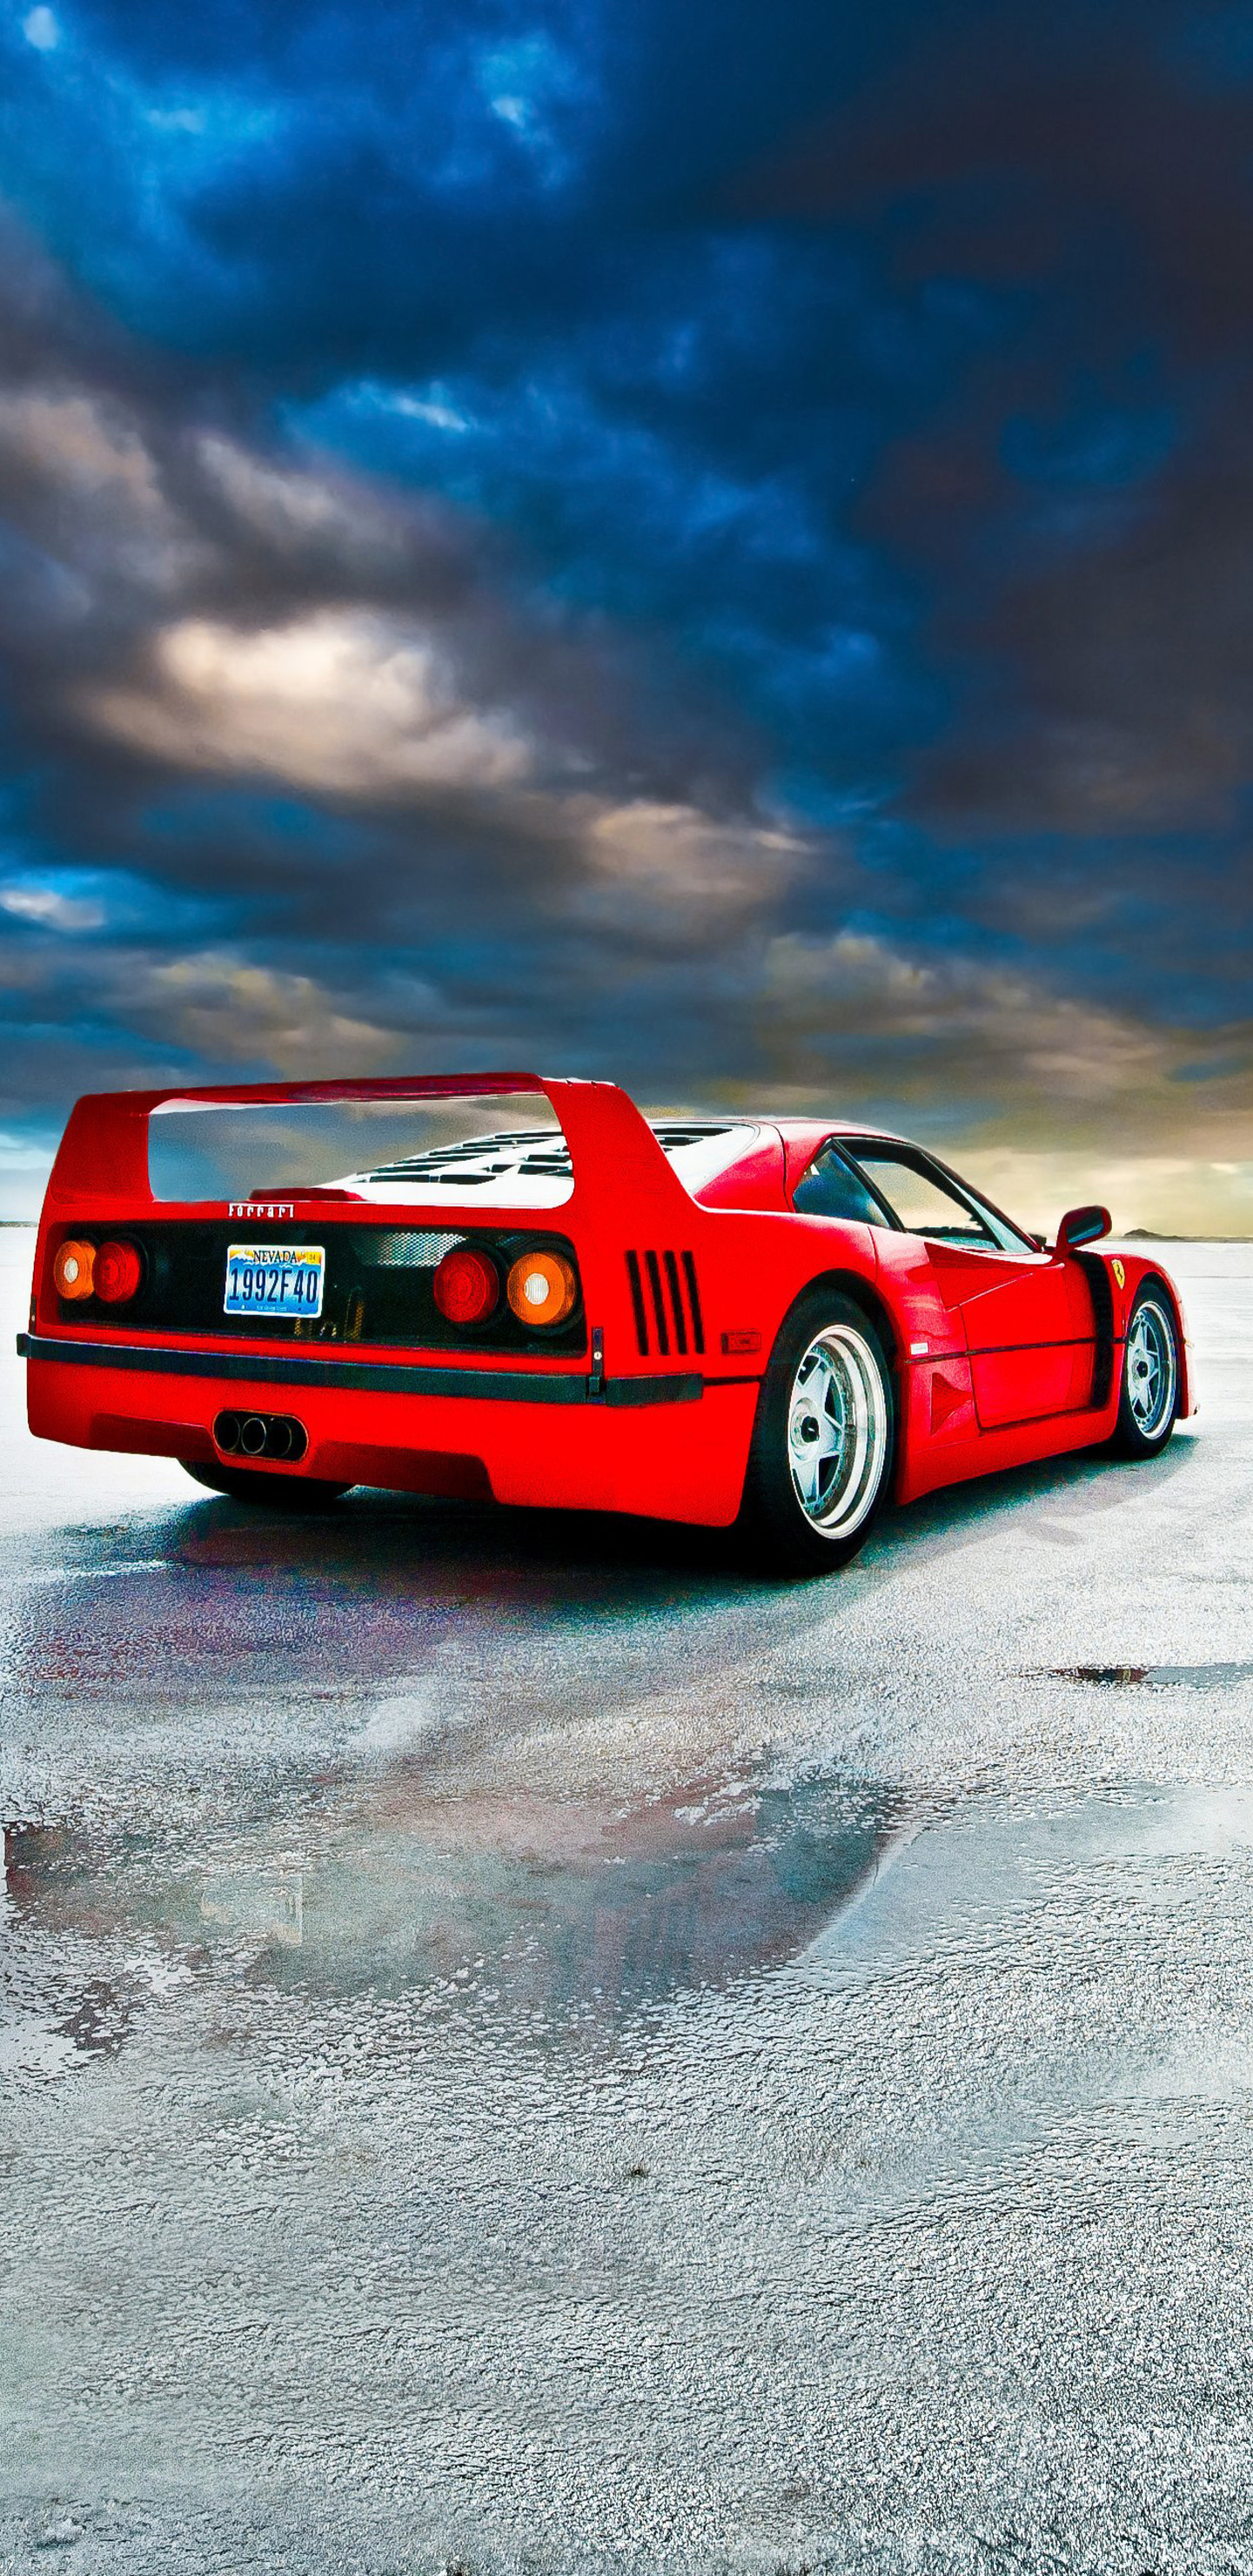 1440x2960 Ferrari F40 Samsung Galaxy Note 9 8 S9 S8 S8 Qhd Hd 4k Wallpapers Images Backgrounds Photos And Pictures